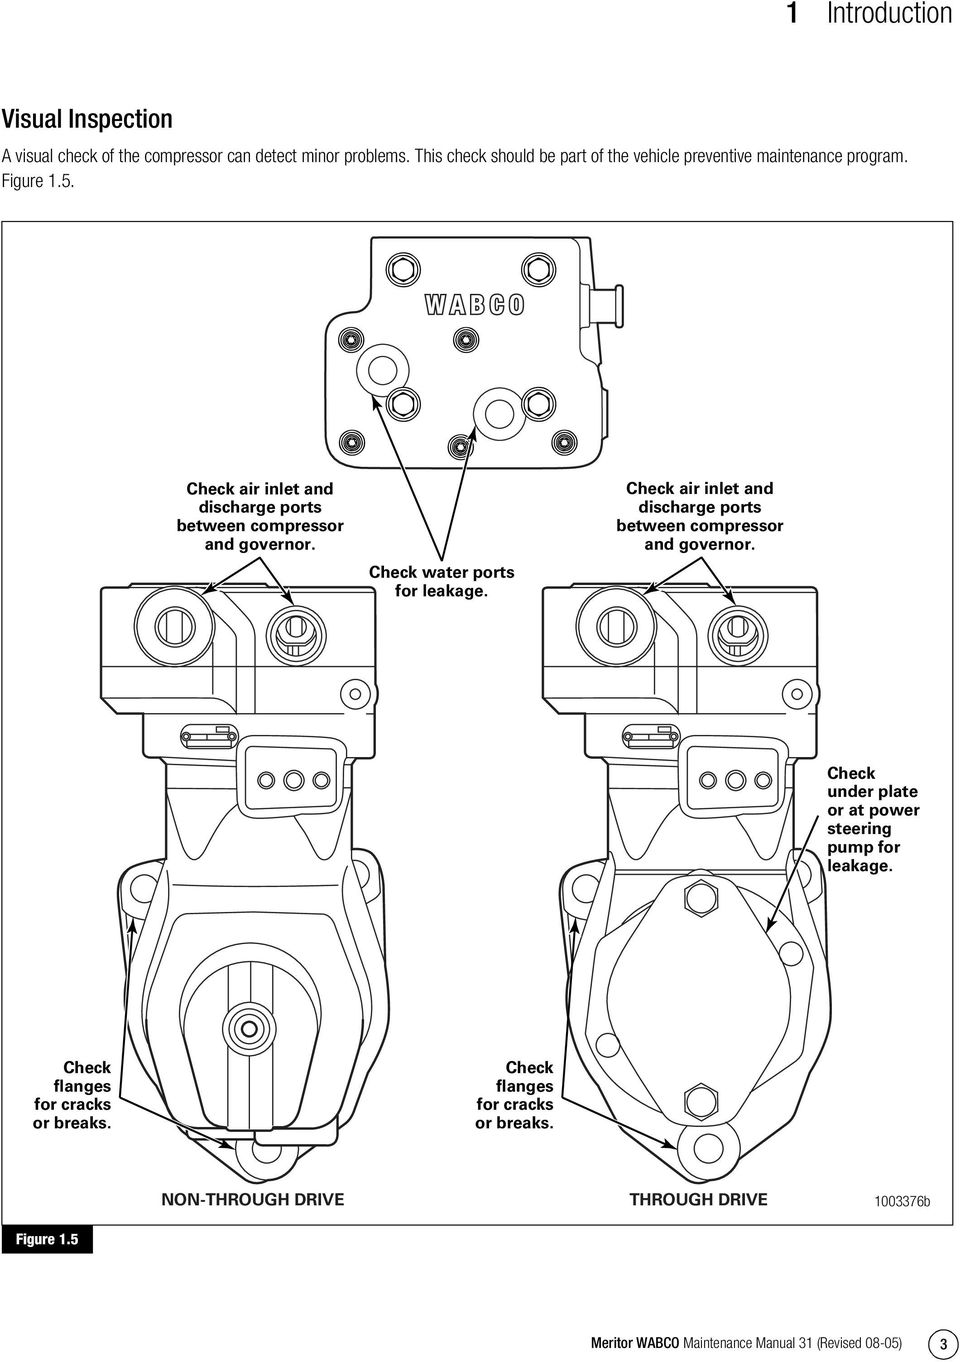 5. Figure 1.5 Check air inlet and discharge ports between compressor and governor. Check water ports for leakage.